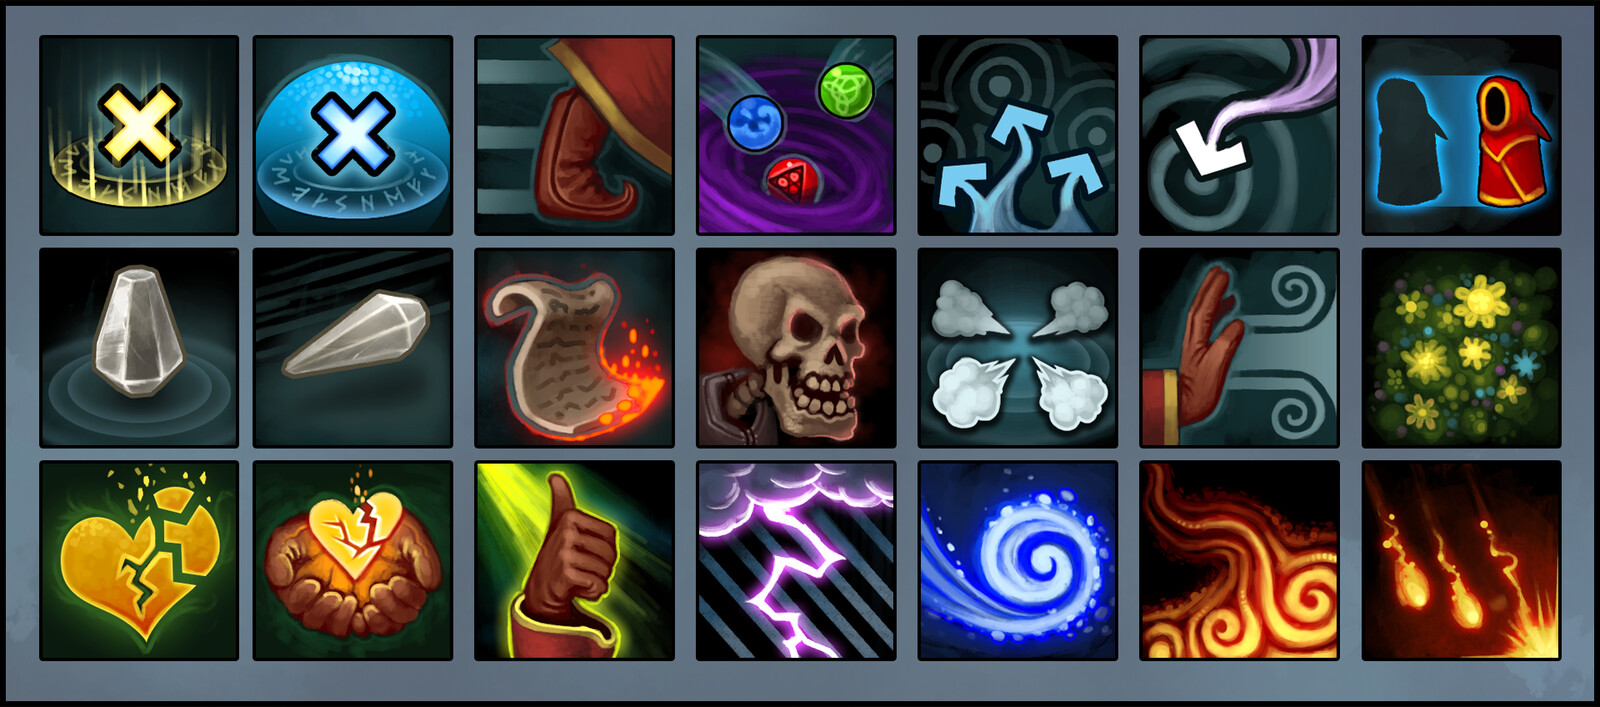 Skill icons for all spells the wizards could use